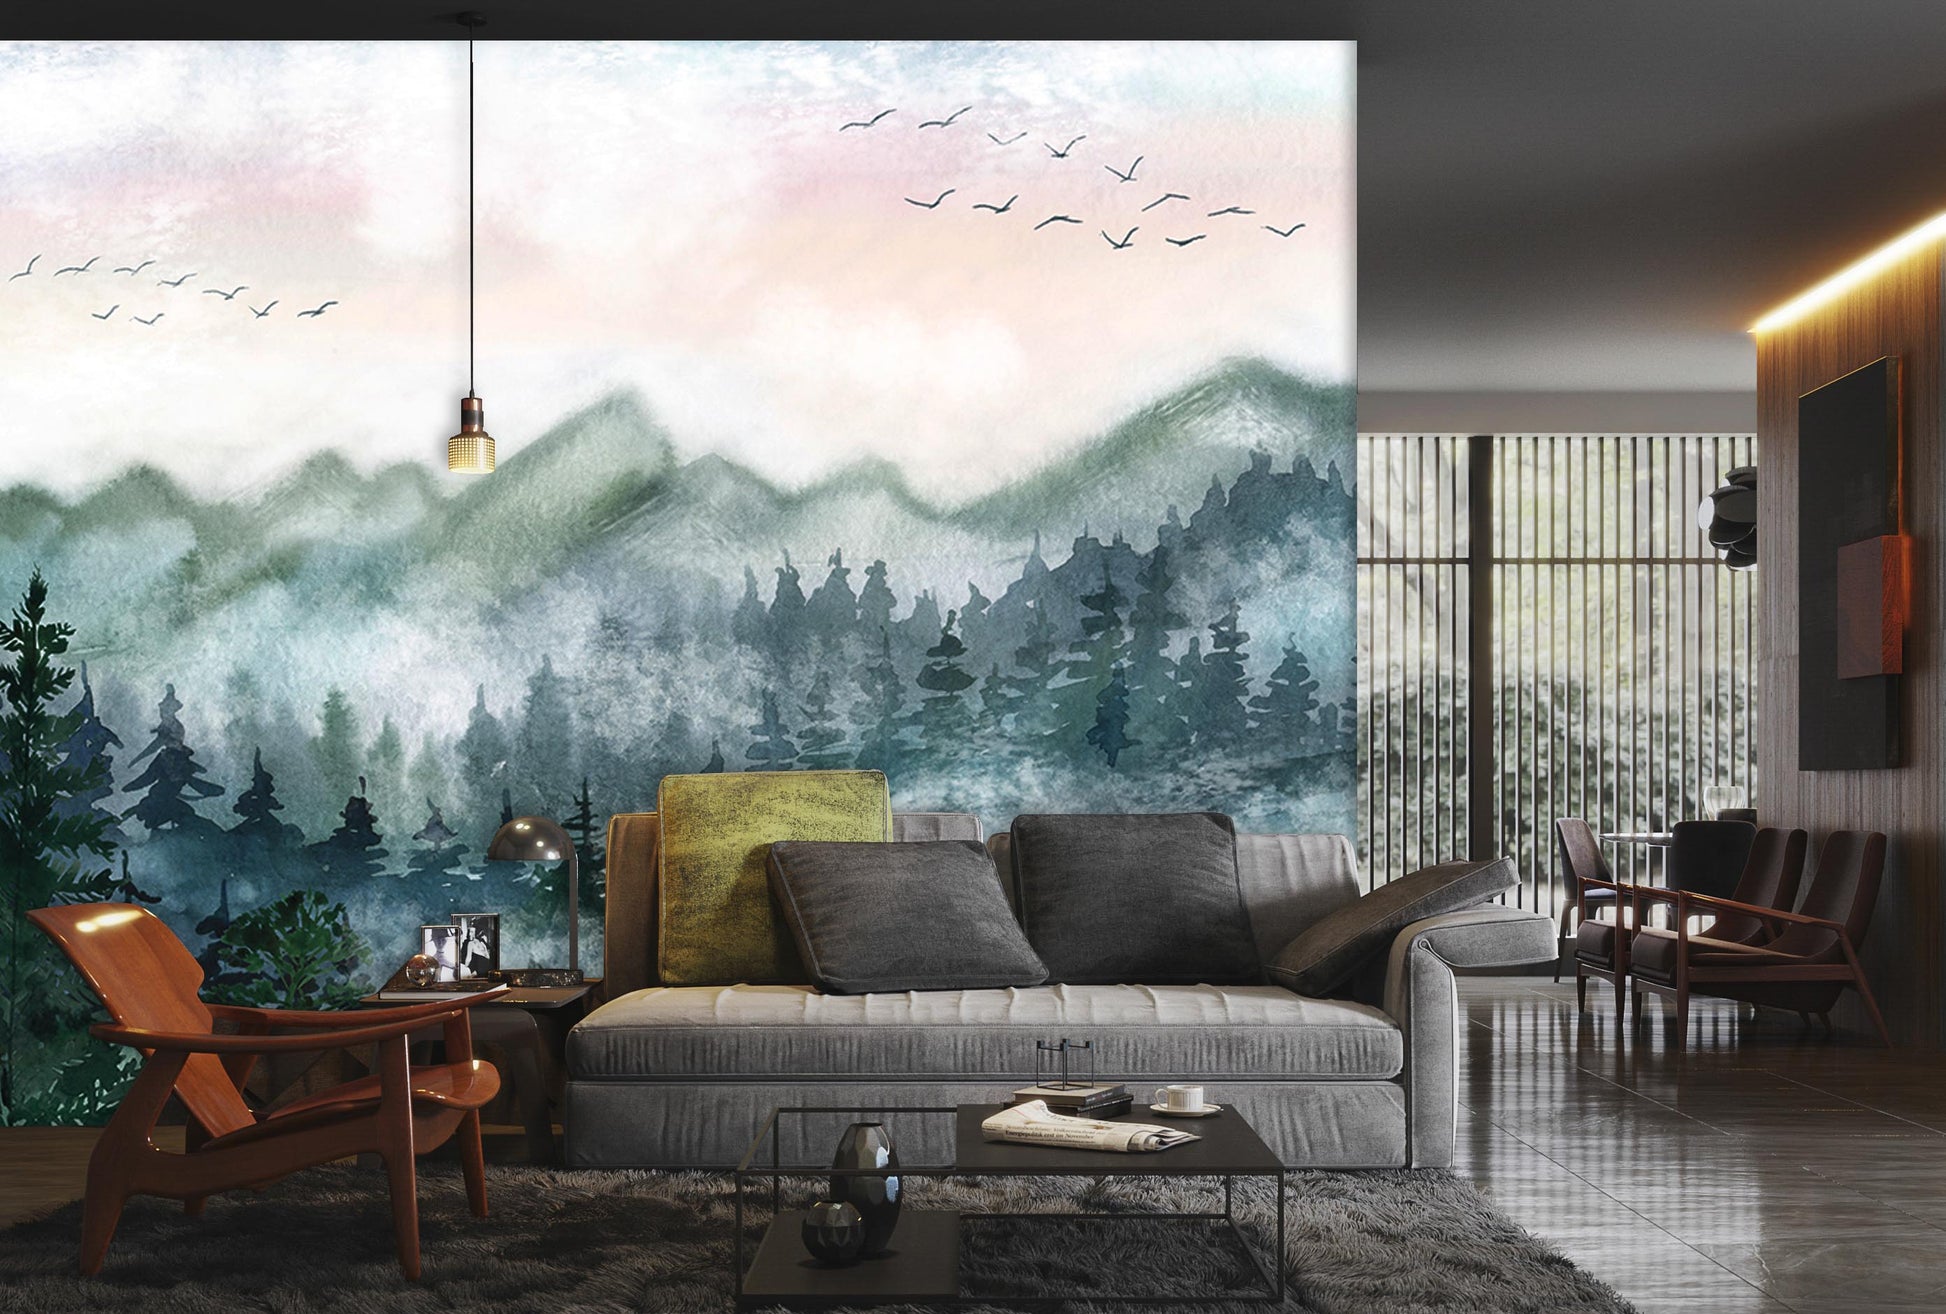 wallpaper mural of a misty woodland for use in decorating the living room